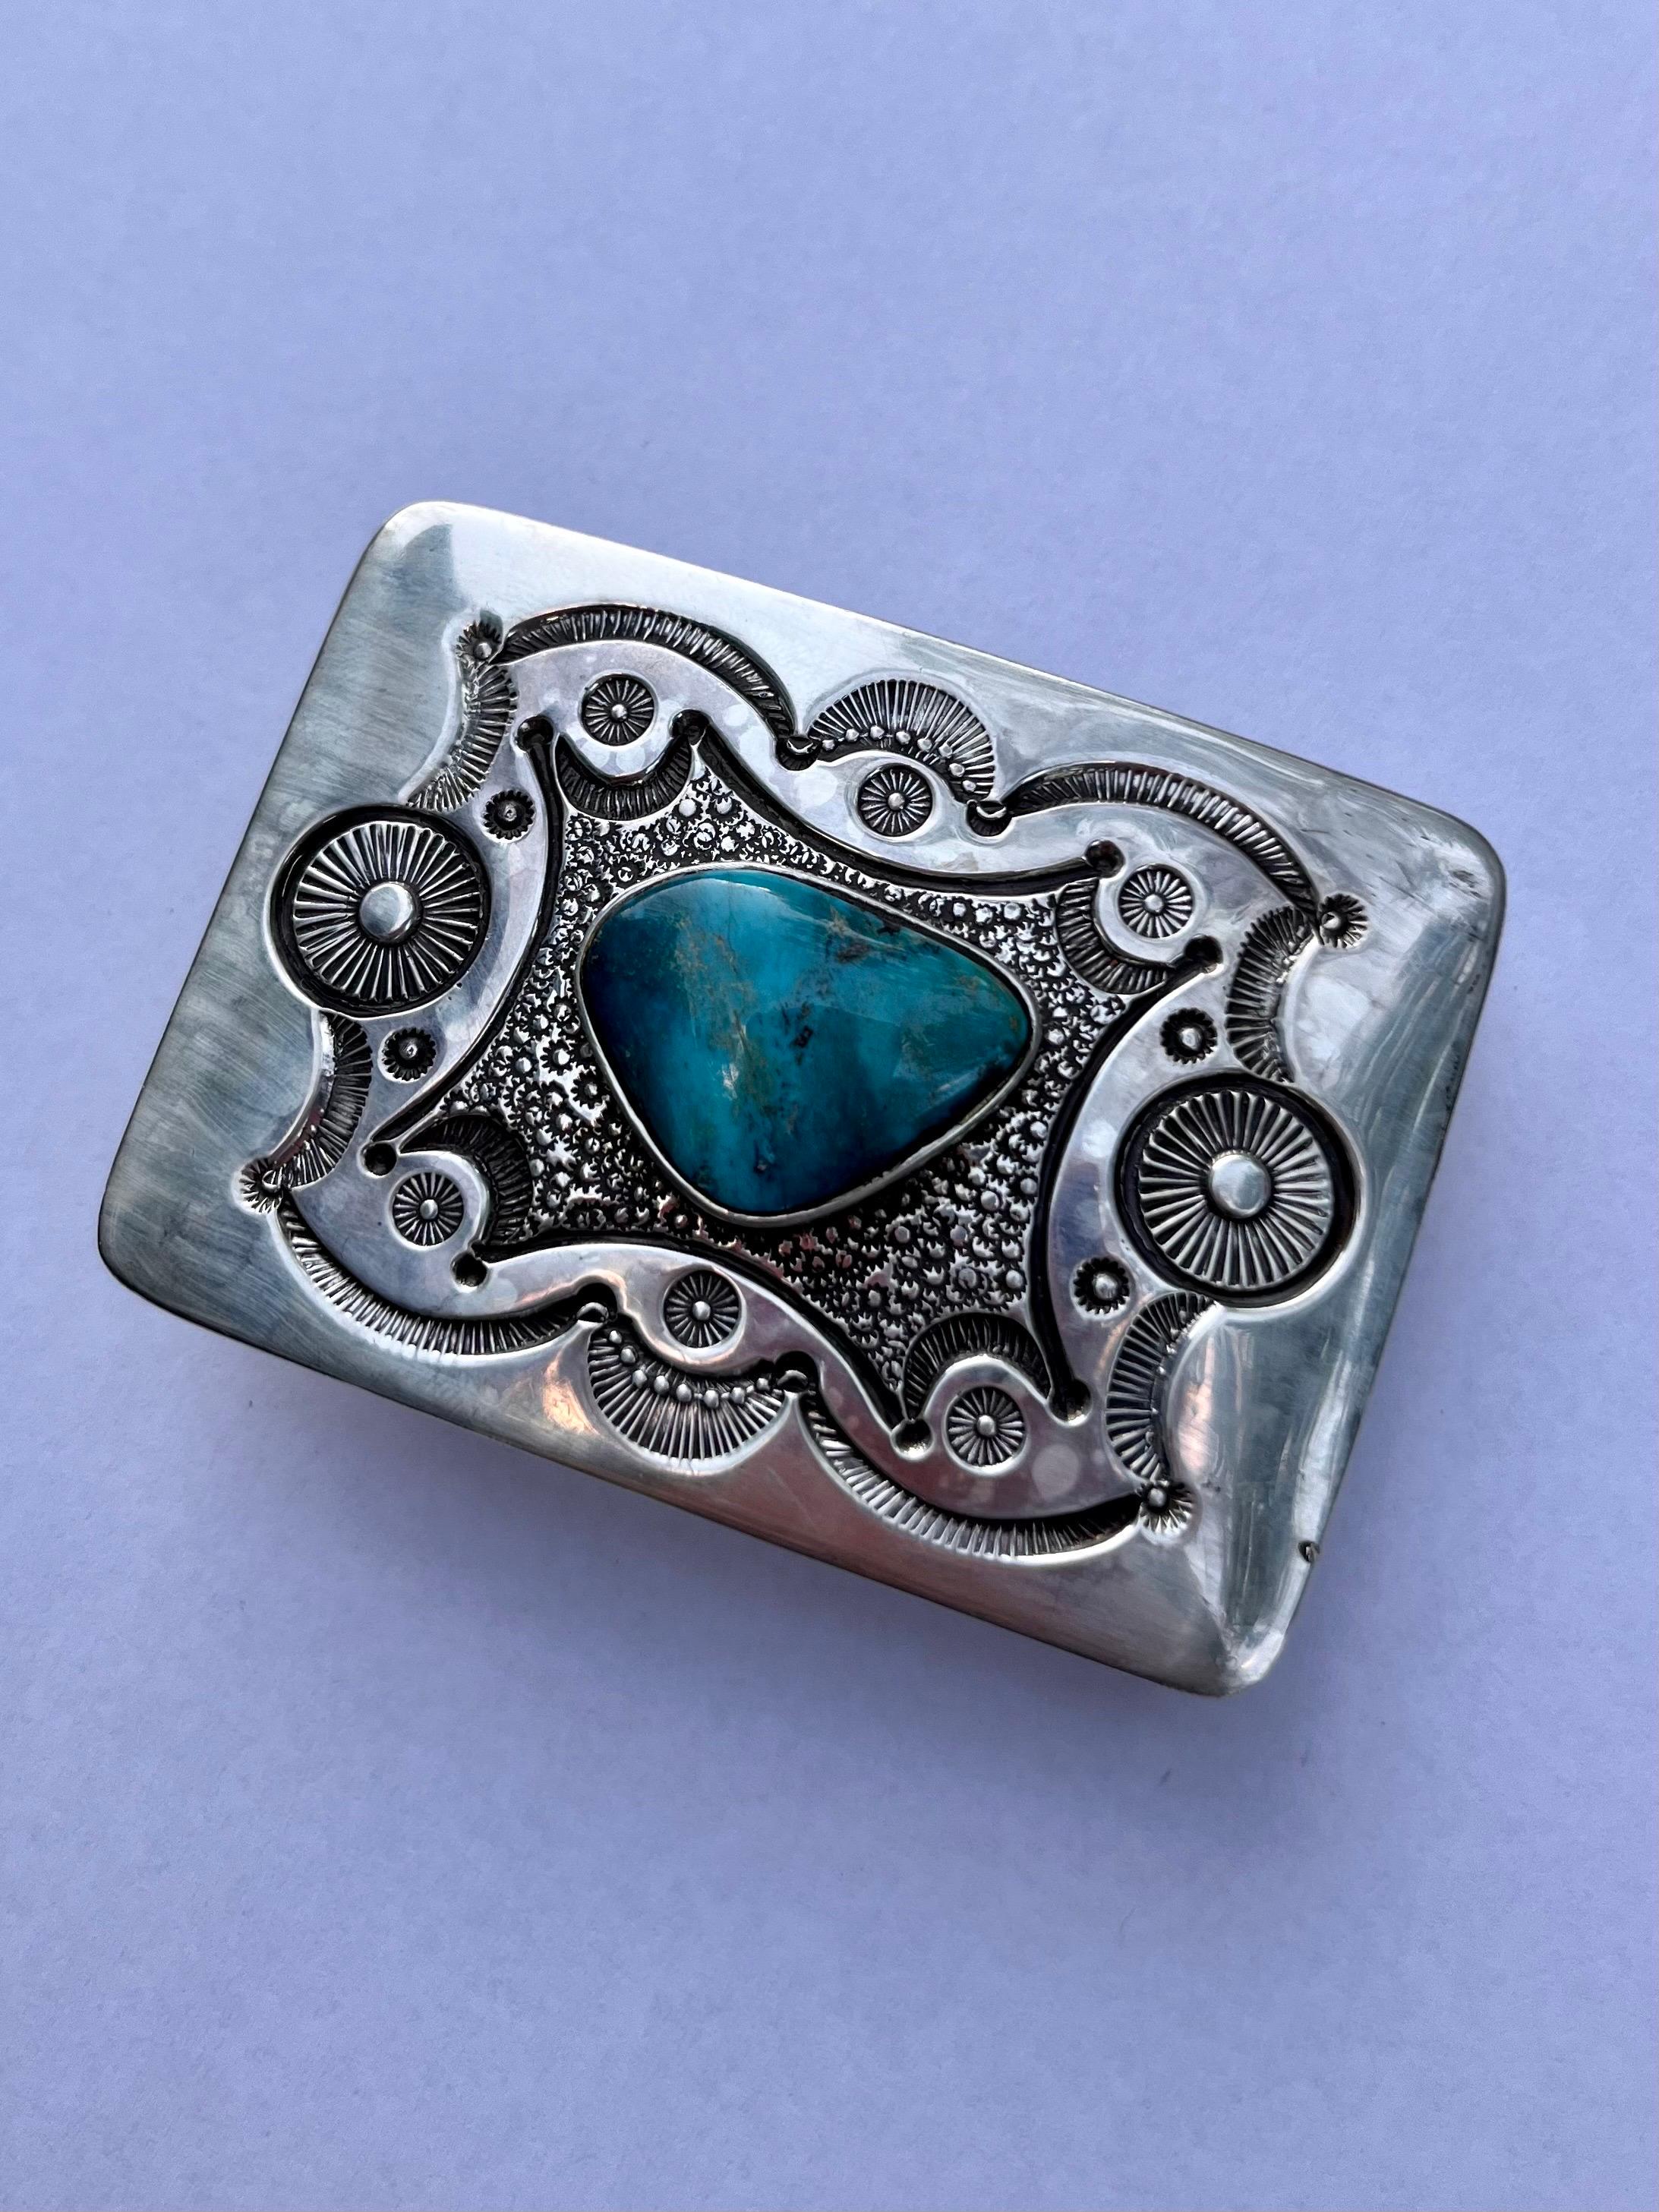 Vintage Native American Indian Sterling Turquoise Belt Buckle by Art Tafoya In Good Condition For Sale In Greenport, NY